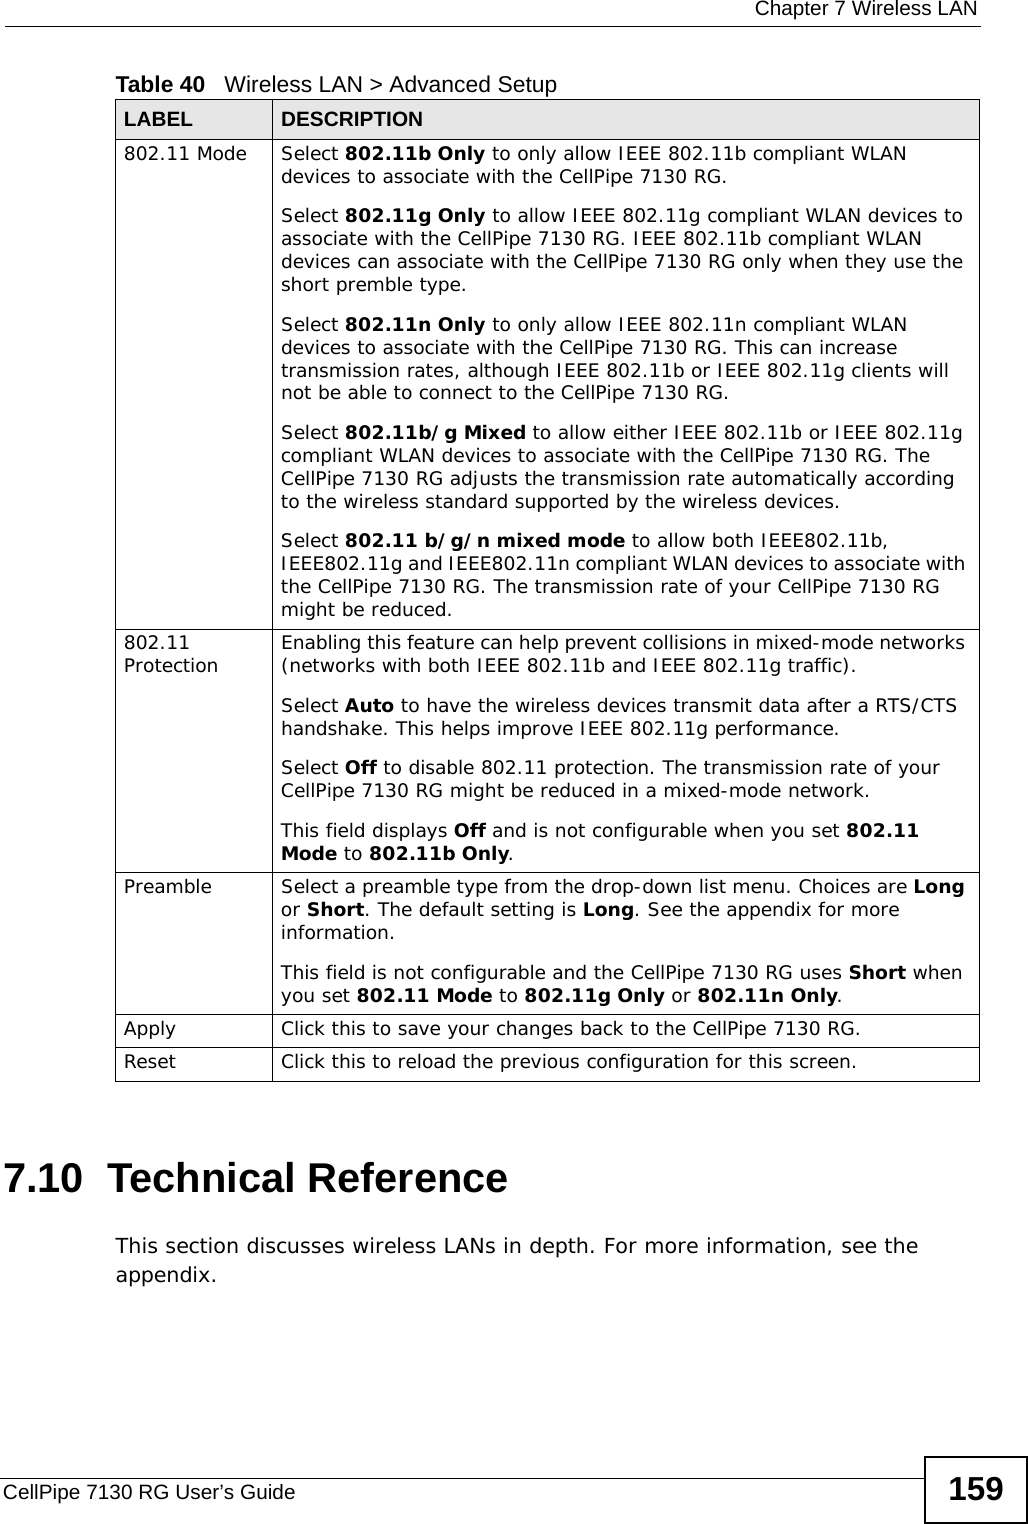  Chapter 7 Wireless LANCellPipe 7130 RG User’s Guide 1597.10  Technical ReferenceThis section discusses wireless LANs in depth. For more information, see the appendix.802.11 Mode Select 802.11b Only to only allow IEEE 802.11b compliant WLAN devices to associate with the CellPipe 7130 RG. Select 802.11g Only to allow IEEE 802.11g compliant WLAN devices to associate with the CellPipe 7130 RG. IEEE 802.11b compliant WLAN devices can associate with the CellPipe 7130 RG only when they use the short premble type.Select 802.11n Only to only allow IEEE 802.11n compliant WLAN devices to associate with the CellPipe 7130 RG. This can increase transmission rates, although IEEE 802.11b or IEEE 802.11g clients will not be able to connect to the CellPipe 7130 RG.Select 802.11b/g Mixed to allow either IEEE 802.11b or IEEE 802.11g compliant WLAN devices to associate with the CellPipe 7130 RG. The CellPipe 7130 RG adjusts the transmission rate automatically according to the wireless standard supported by the wireless devices.Select 802.11 b/g/n mixed mode to allow both IEEE802.11b, IEEE802.11g and IEEE802.11n compliant WLAN devices to associate with the CellPipe 7130 RG. The transmission rate of your CellPipe 7130 RG might be reduced.802.11 Protection Enabling this feature can help prevent collisions in mixed-mode networks (networks with both IEEE 802.11b and IEEE 802.11g traffic).Select Auto to have the wireless devices transmit data after a RTS/CTS handshake. This helps improve IEEE 802.11g performance.Select Off to disable 802.11 protection. The transmission rate of your CellPipe 7130 RG might be reduced in a mixed-mode network.This field displays Off and is not configurable when you set 802.11 Mode to 802.11b Only.Preamble Select a preamble type from the drop-down list menu. Choices are Long or Short. The default setting is Long. See the appendix for more information.This field is not configurable and the CellPipe 7130 RG uses Short when you set 802.11 Mode to 802.11g Only or 802.11n Only.Apply Click this to save your changes back to the CellPipe 7130 RG.Reset Click this to reload the previous configuration for this screen.Table 40   Wireless LAN &gt; Advanced SetupLABEL DESCRIPTION